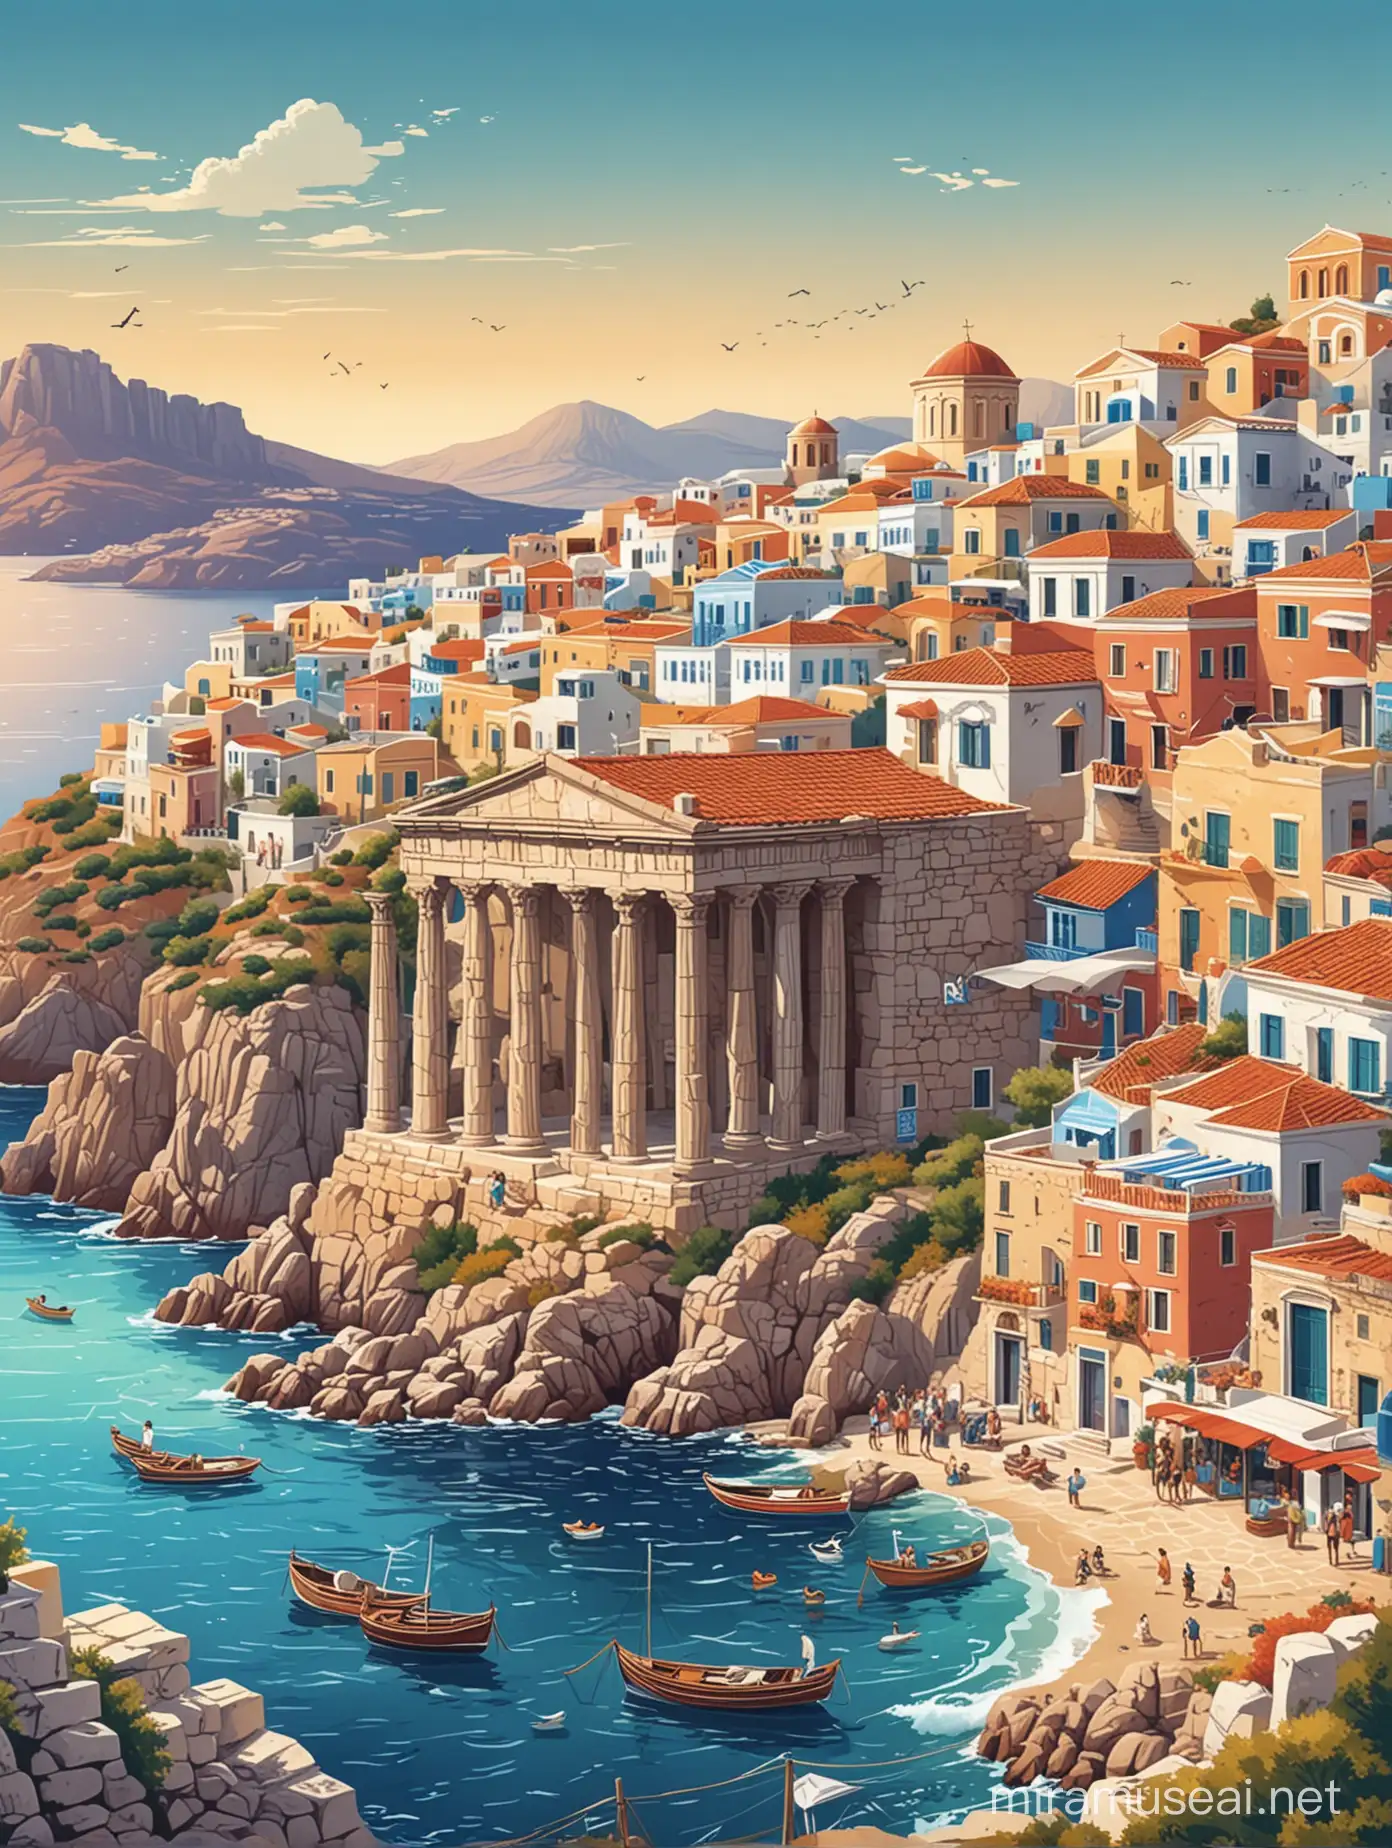 Vibrant Illustration of Greece Iconic Landmarks and Scenic Beauty